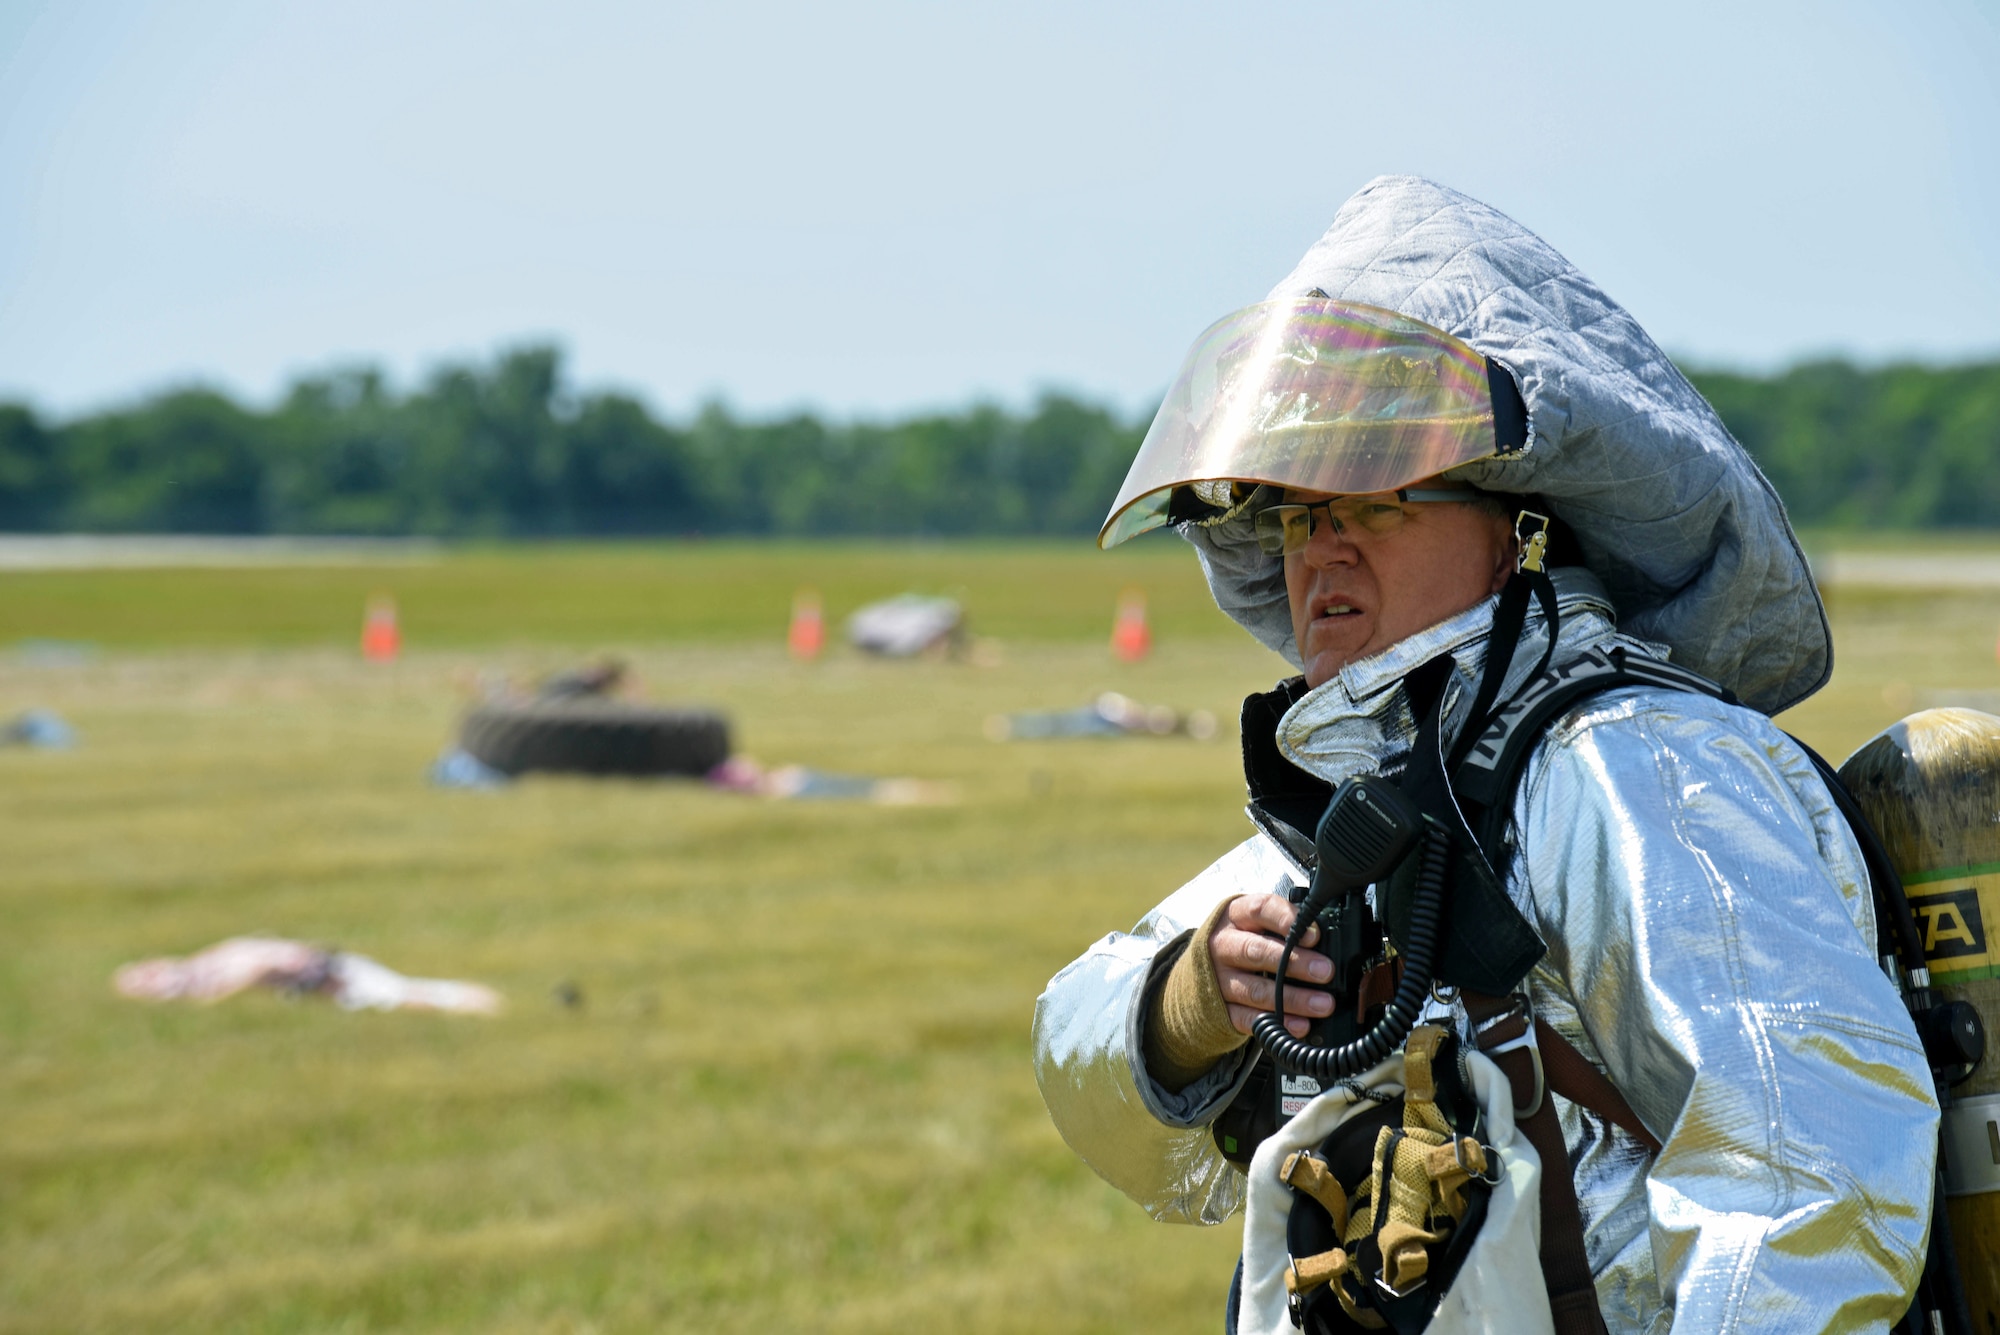 Fire Lt. Lewis Garver, with the 121st Civil Engineering Fire Department, begins the initial response to a full-scale, mass casualty emergency preparedness exercise June 14, 2016 at Rickenbacker International Airport. The exercise was held to test and evaluate emergency response plans of the Columbus Regional Airport Authority, first response emergency services, hospitals, community non-profits and other local emergency preparedness organizations in the event of a major disaster. (U.S. Air National Guard photo by Airman 1st Class Ashley Williams/Released)